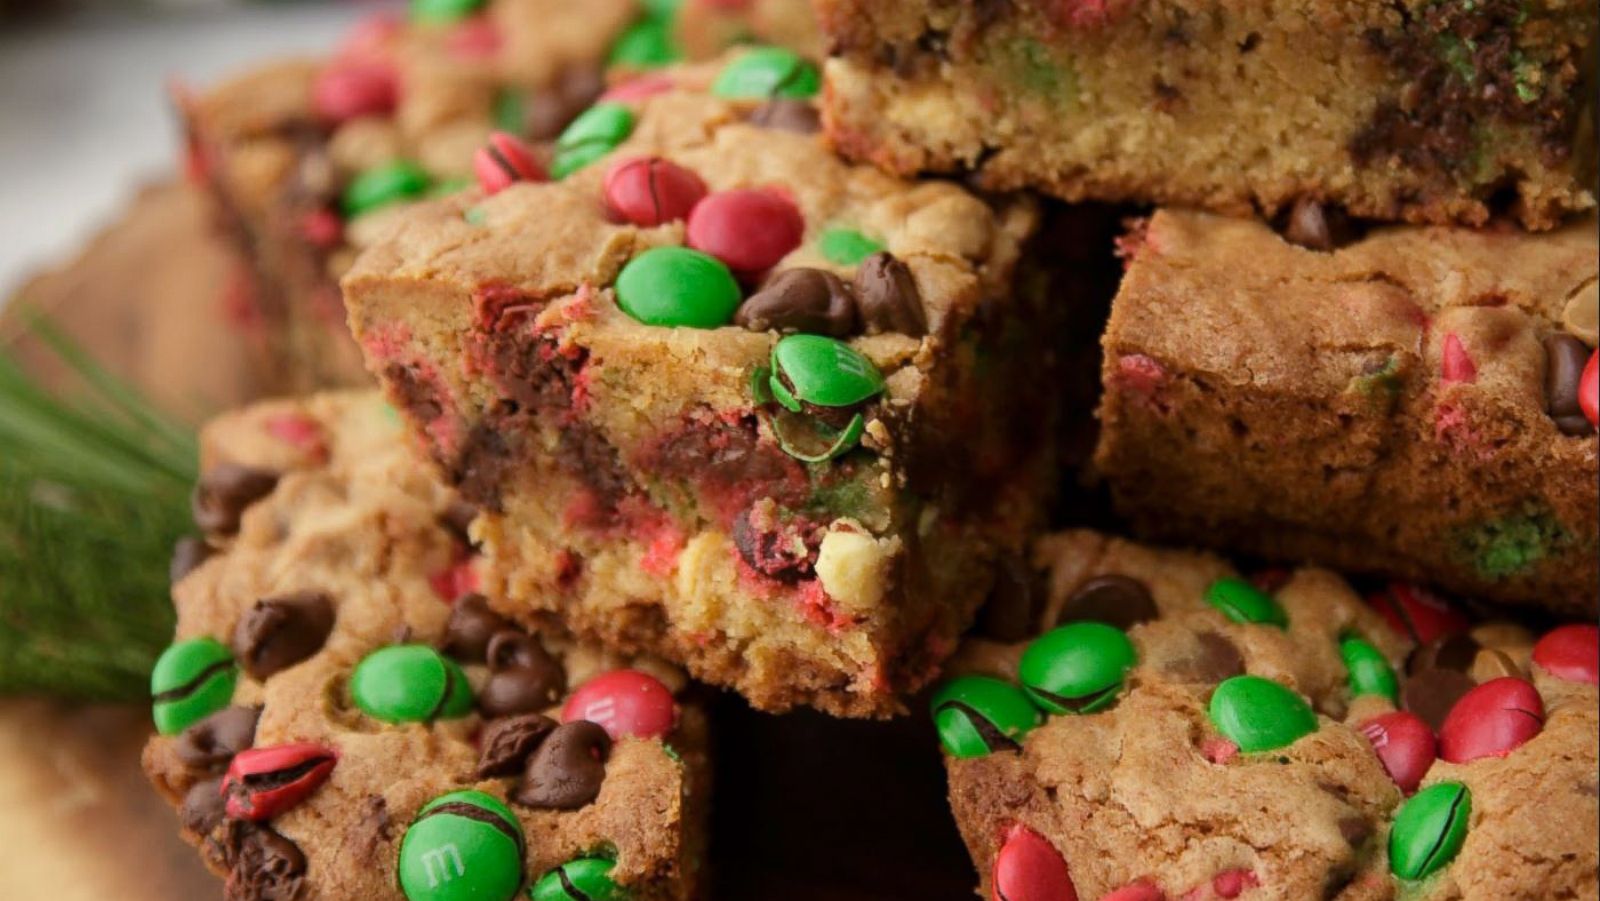 M&M Chocolate Bars - Cookies for Days